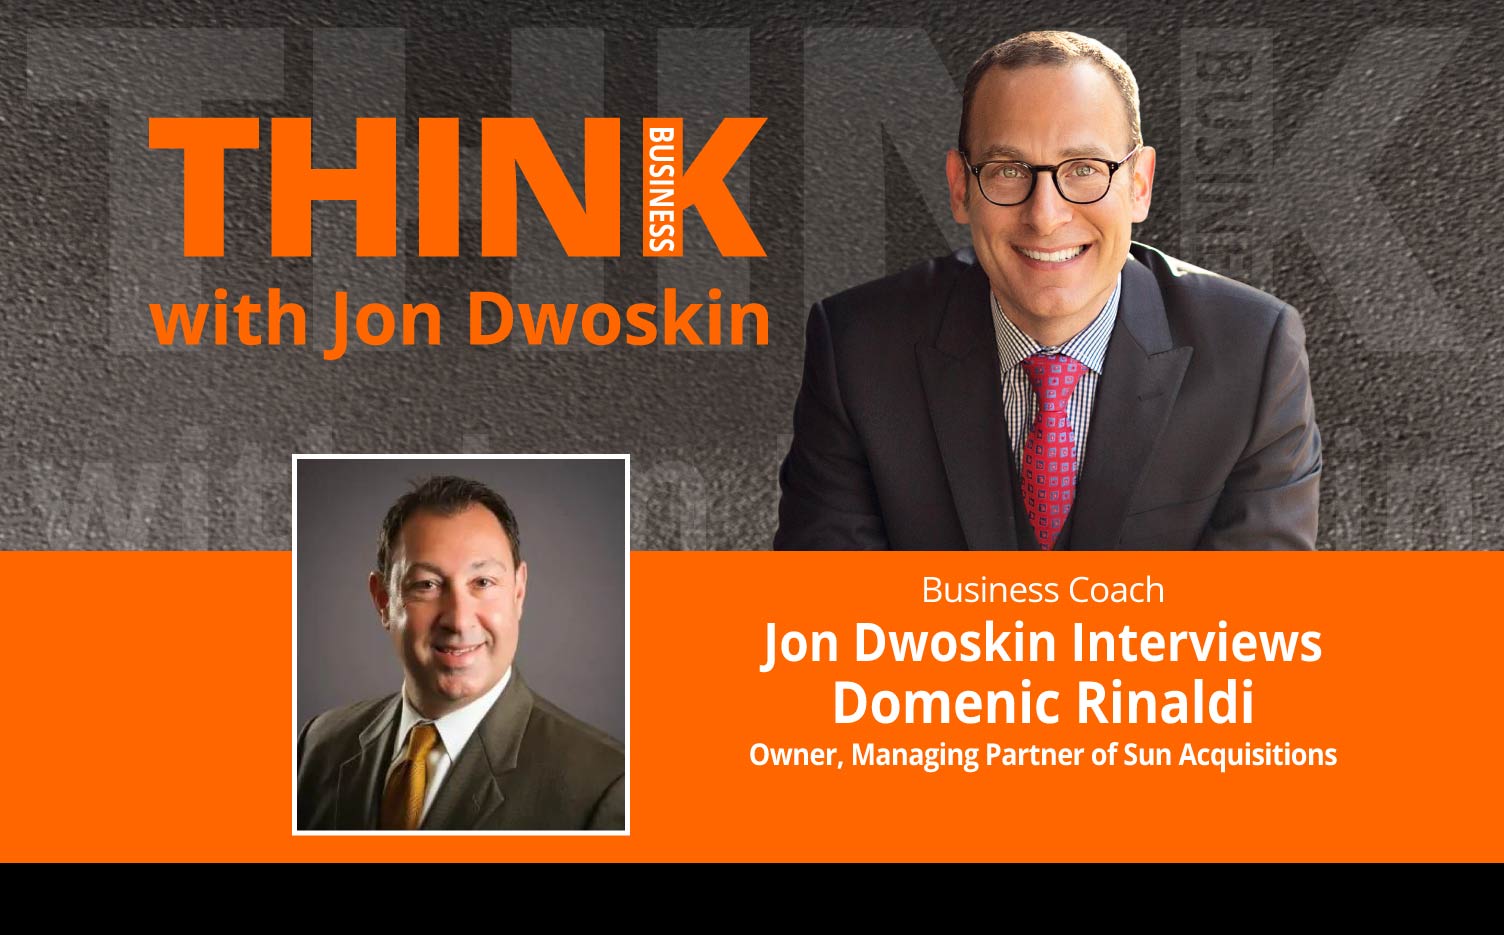 THINK Business Podcast: Jon Dwoskin Interviews Domenic Rinaldi, Owner, Managing Partner of Sun Acquisitions